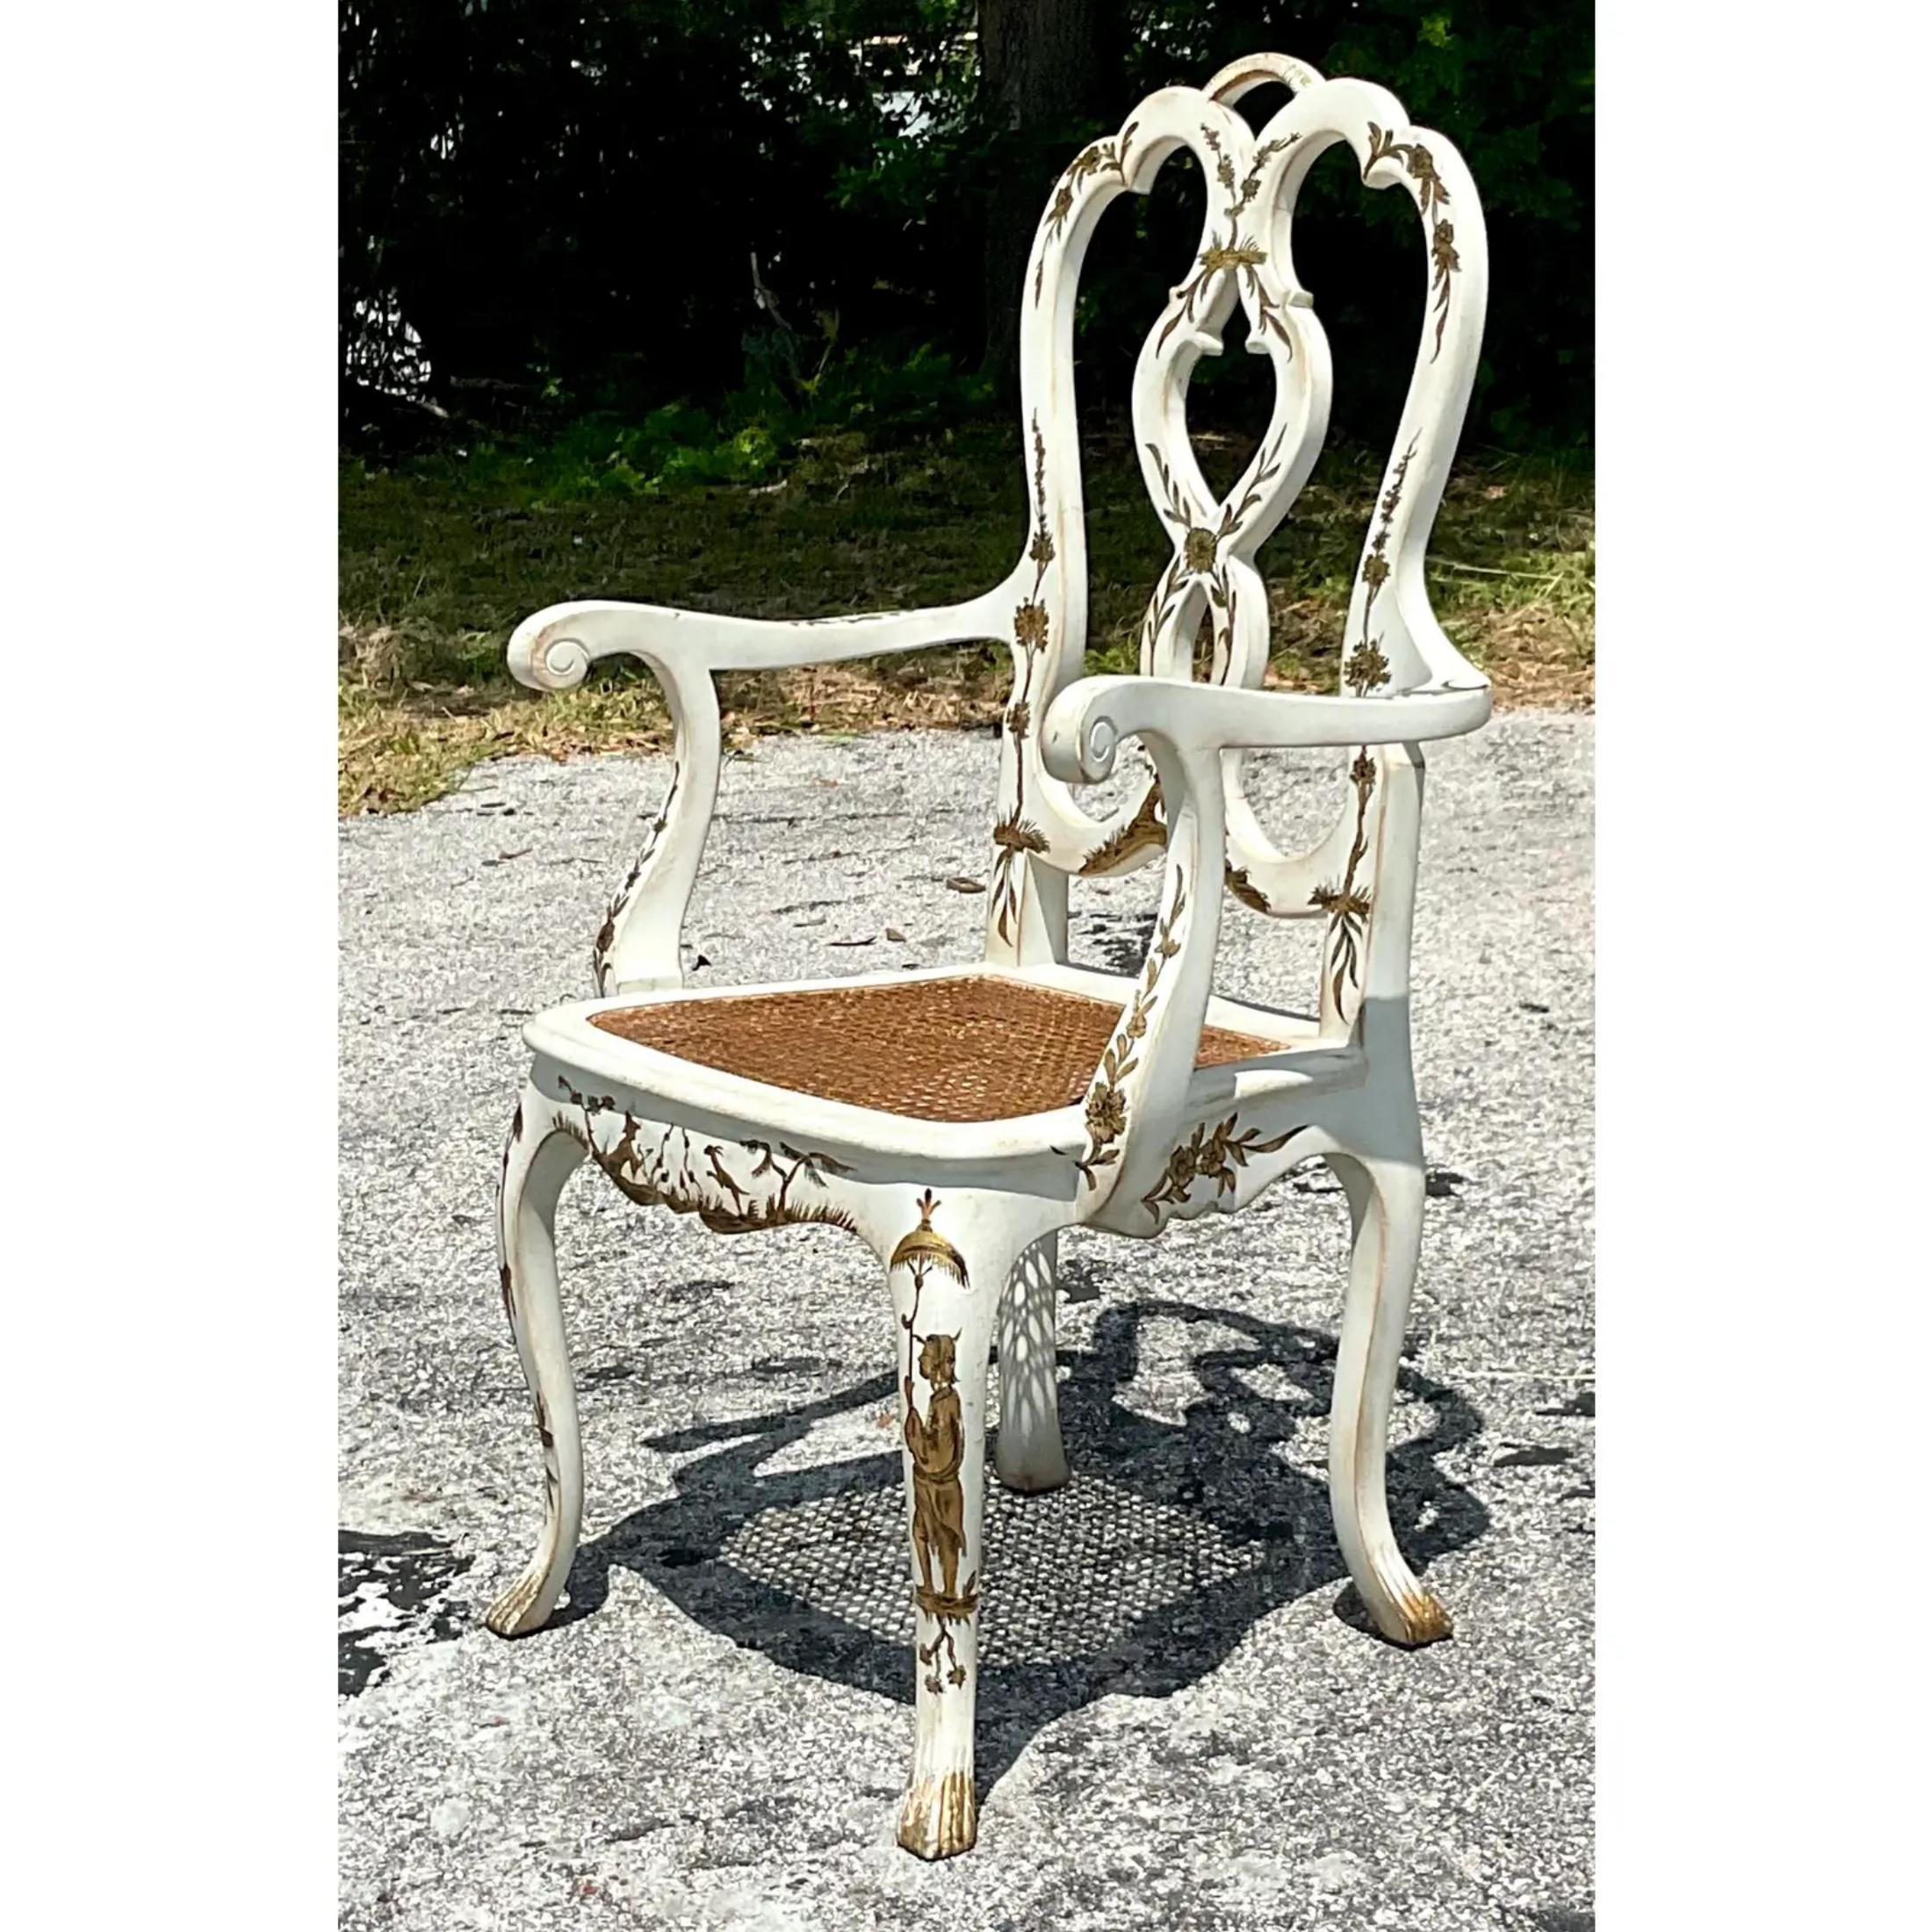 A fabulous vintage Regency arm chairs. A chic Chippendale frame with hand painted Chinoiserie Seat. Inset cane seat. Perfect as a desk chair or just gorgeous additional seating. Acquired from a Palm Beach estate. 